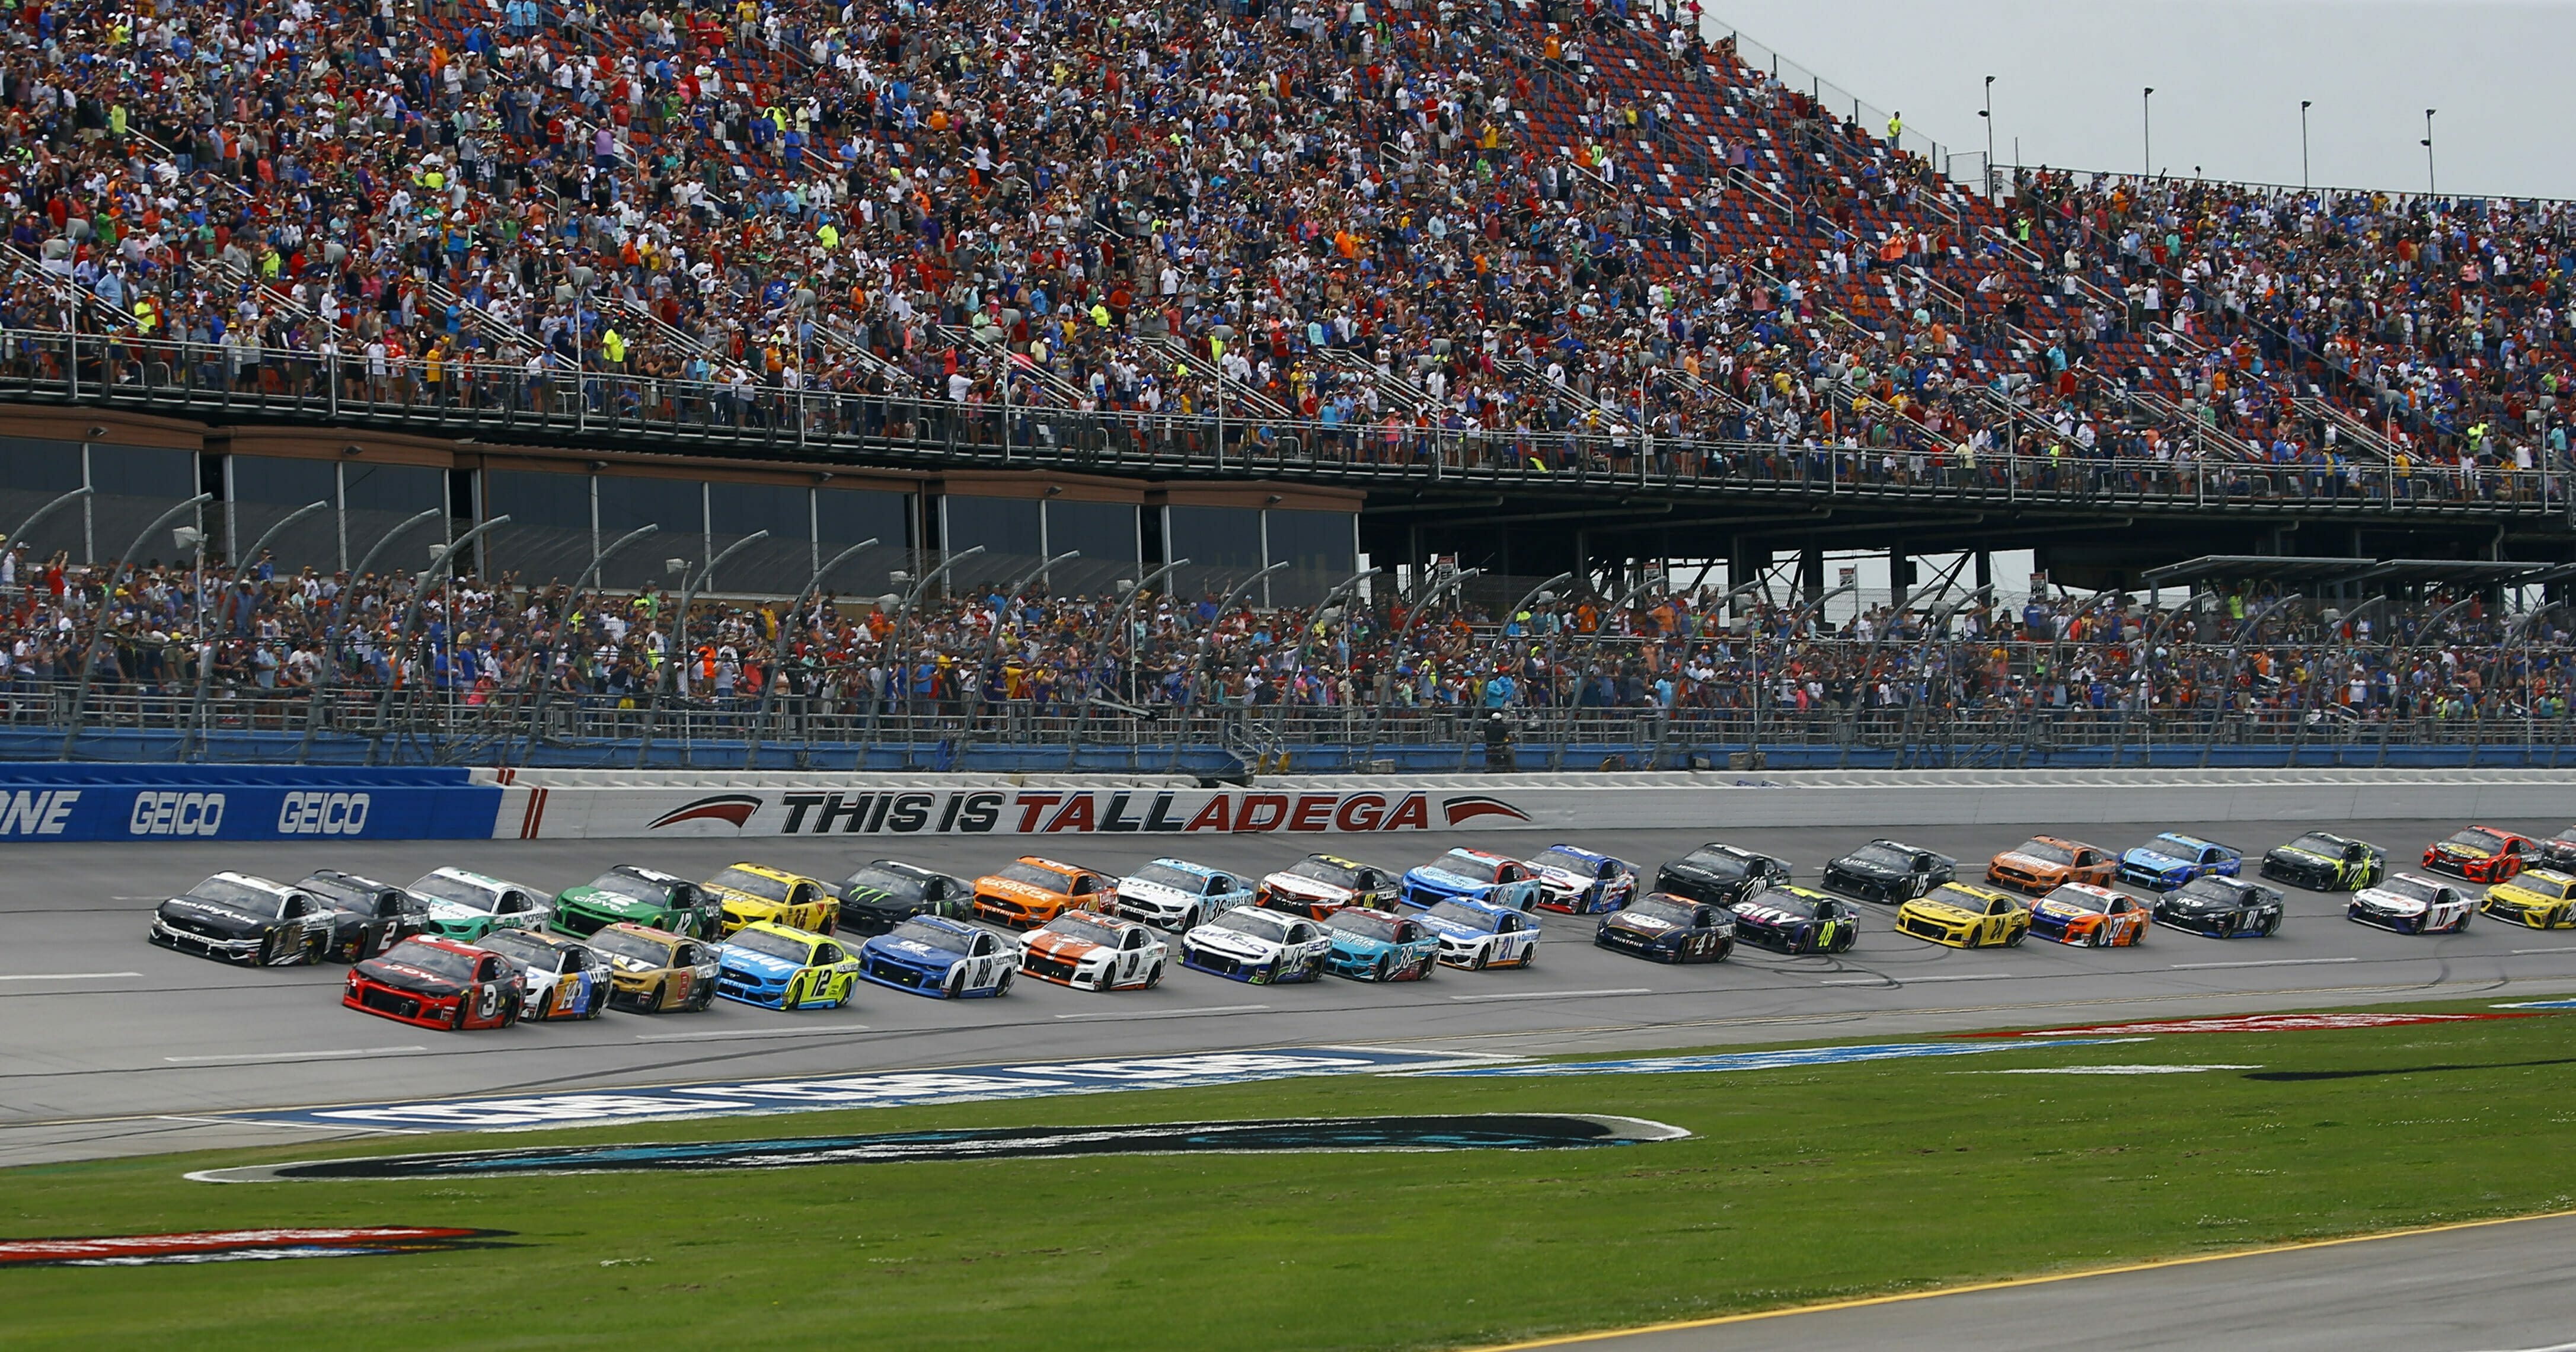 Austin Dillon leads the pack to start the NASCAR Cup Series race at Talladega Superspeedway on April 28, 2019.